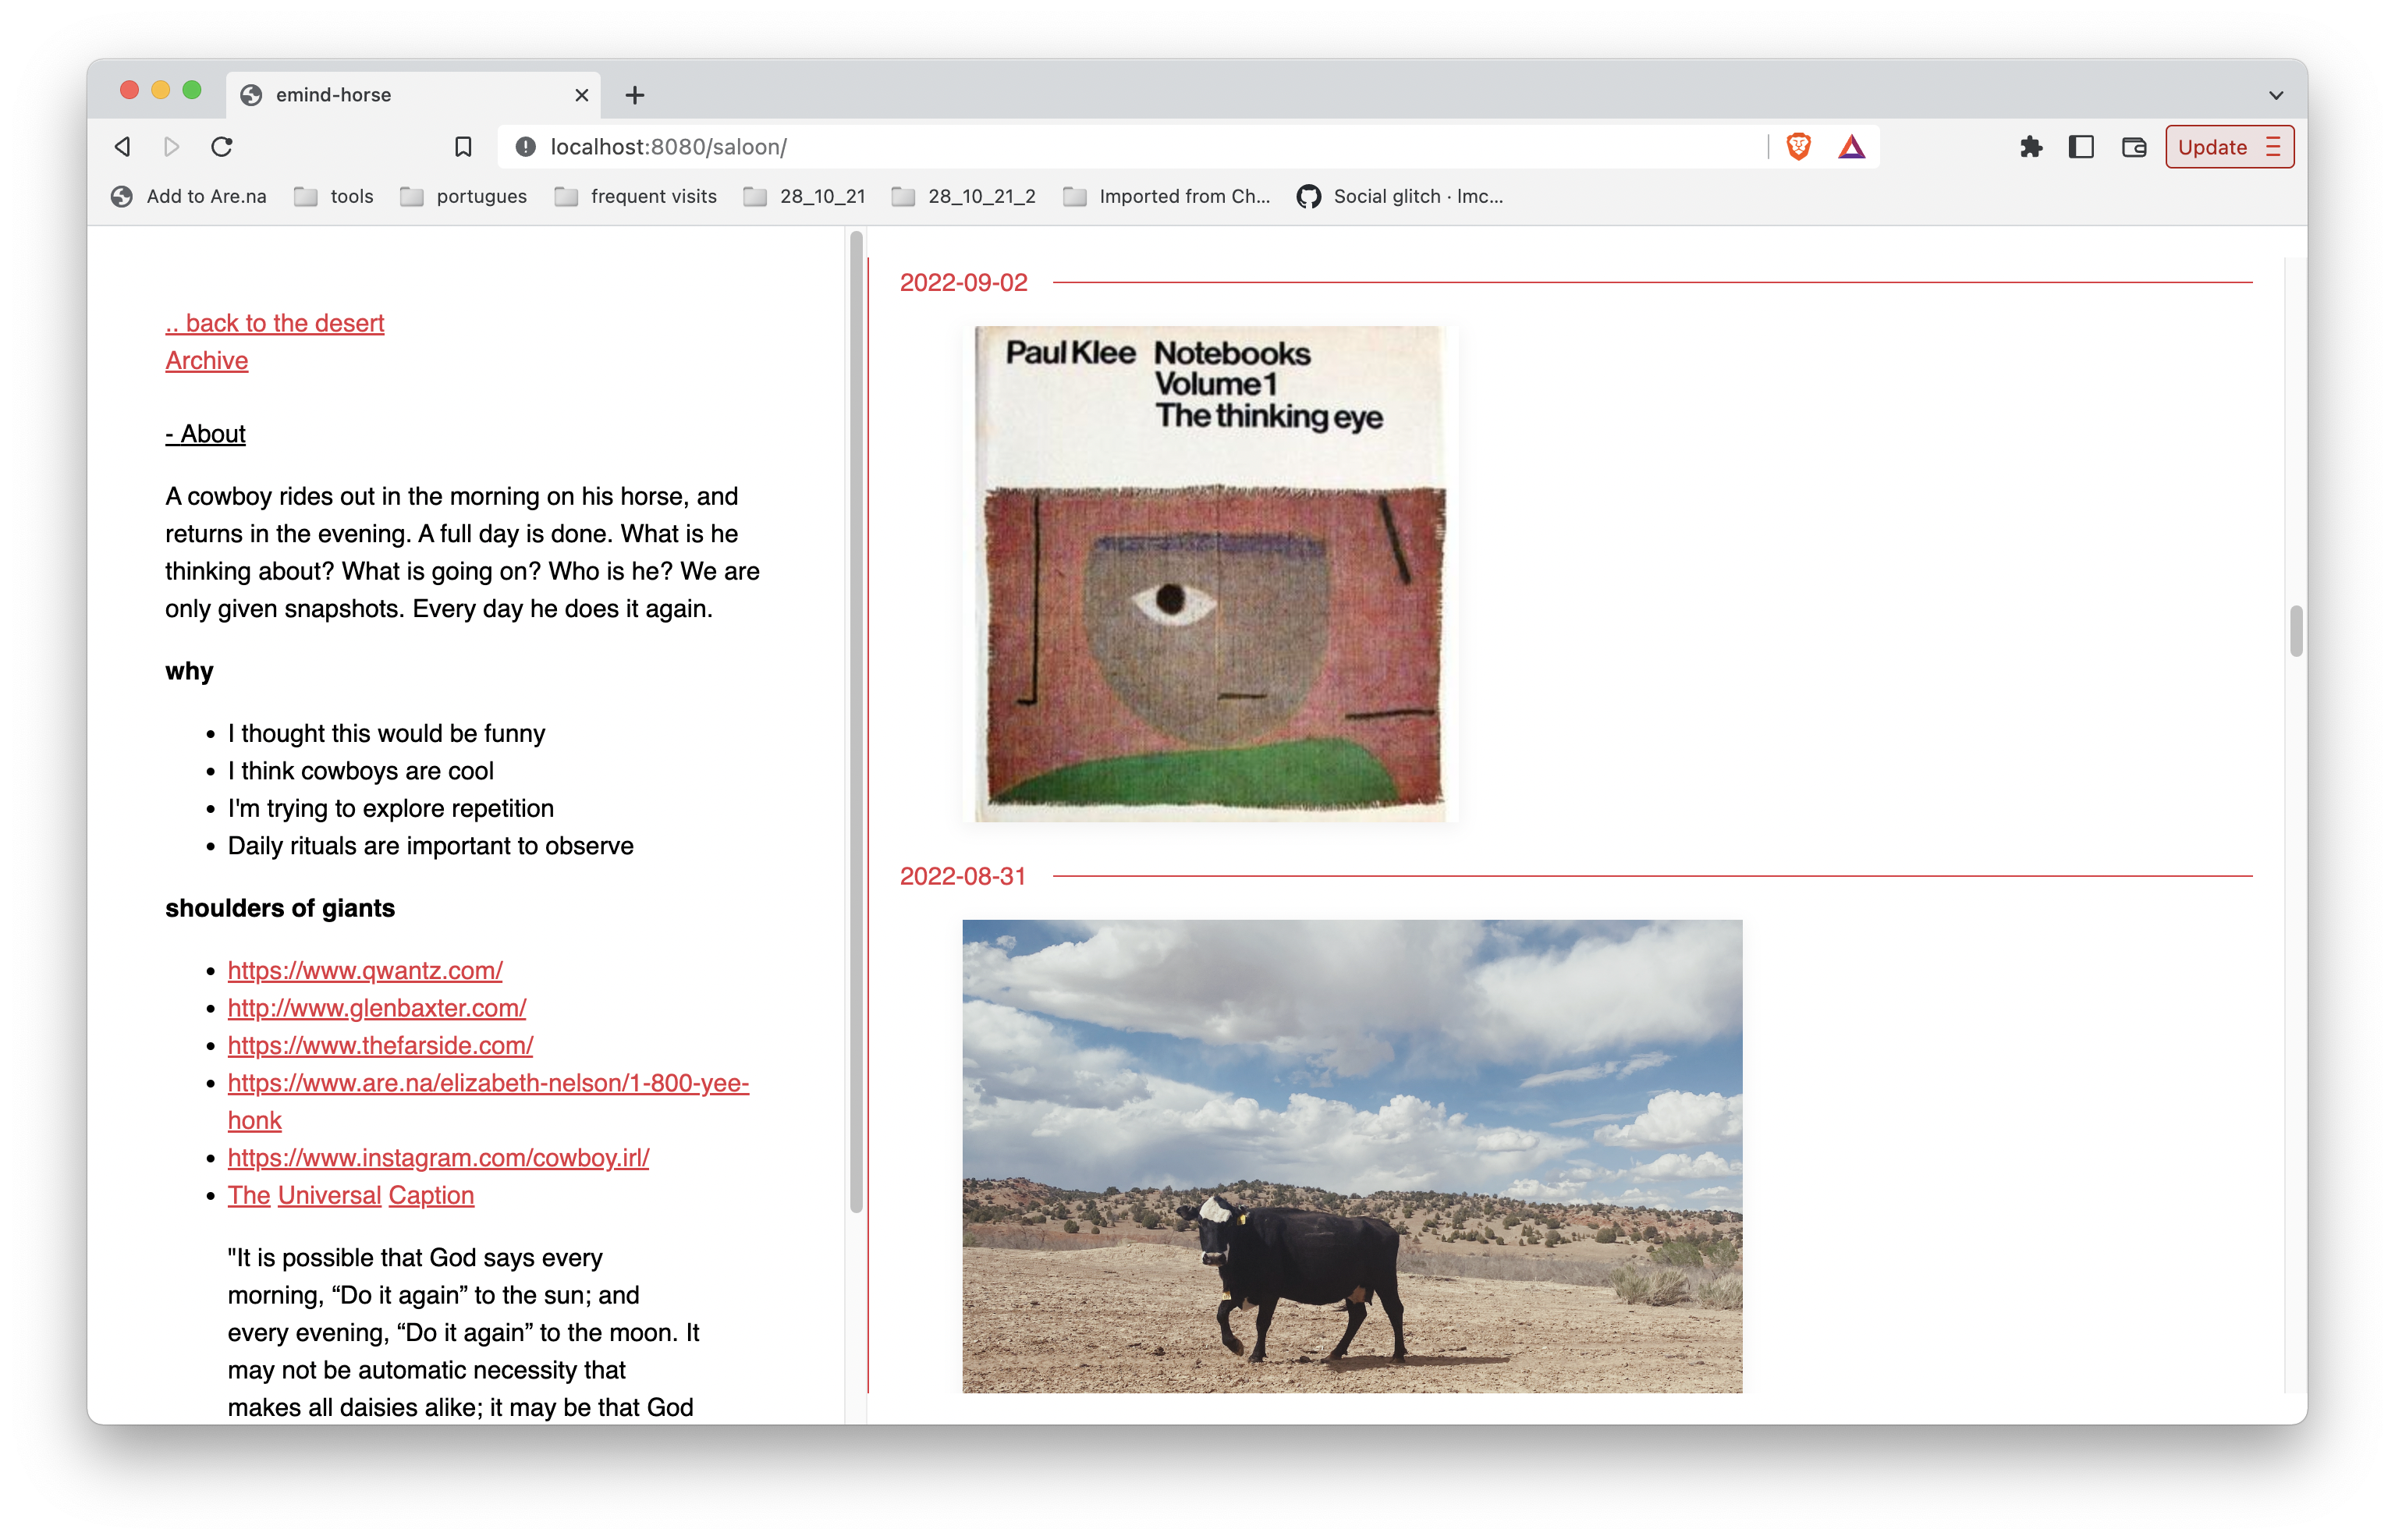 return.horse website redesign, journal with images